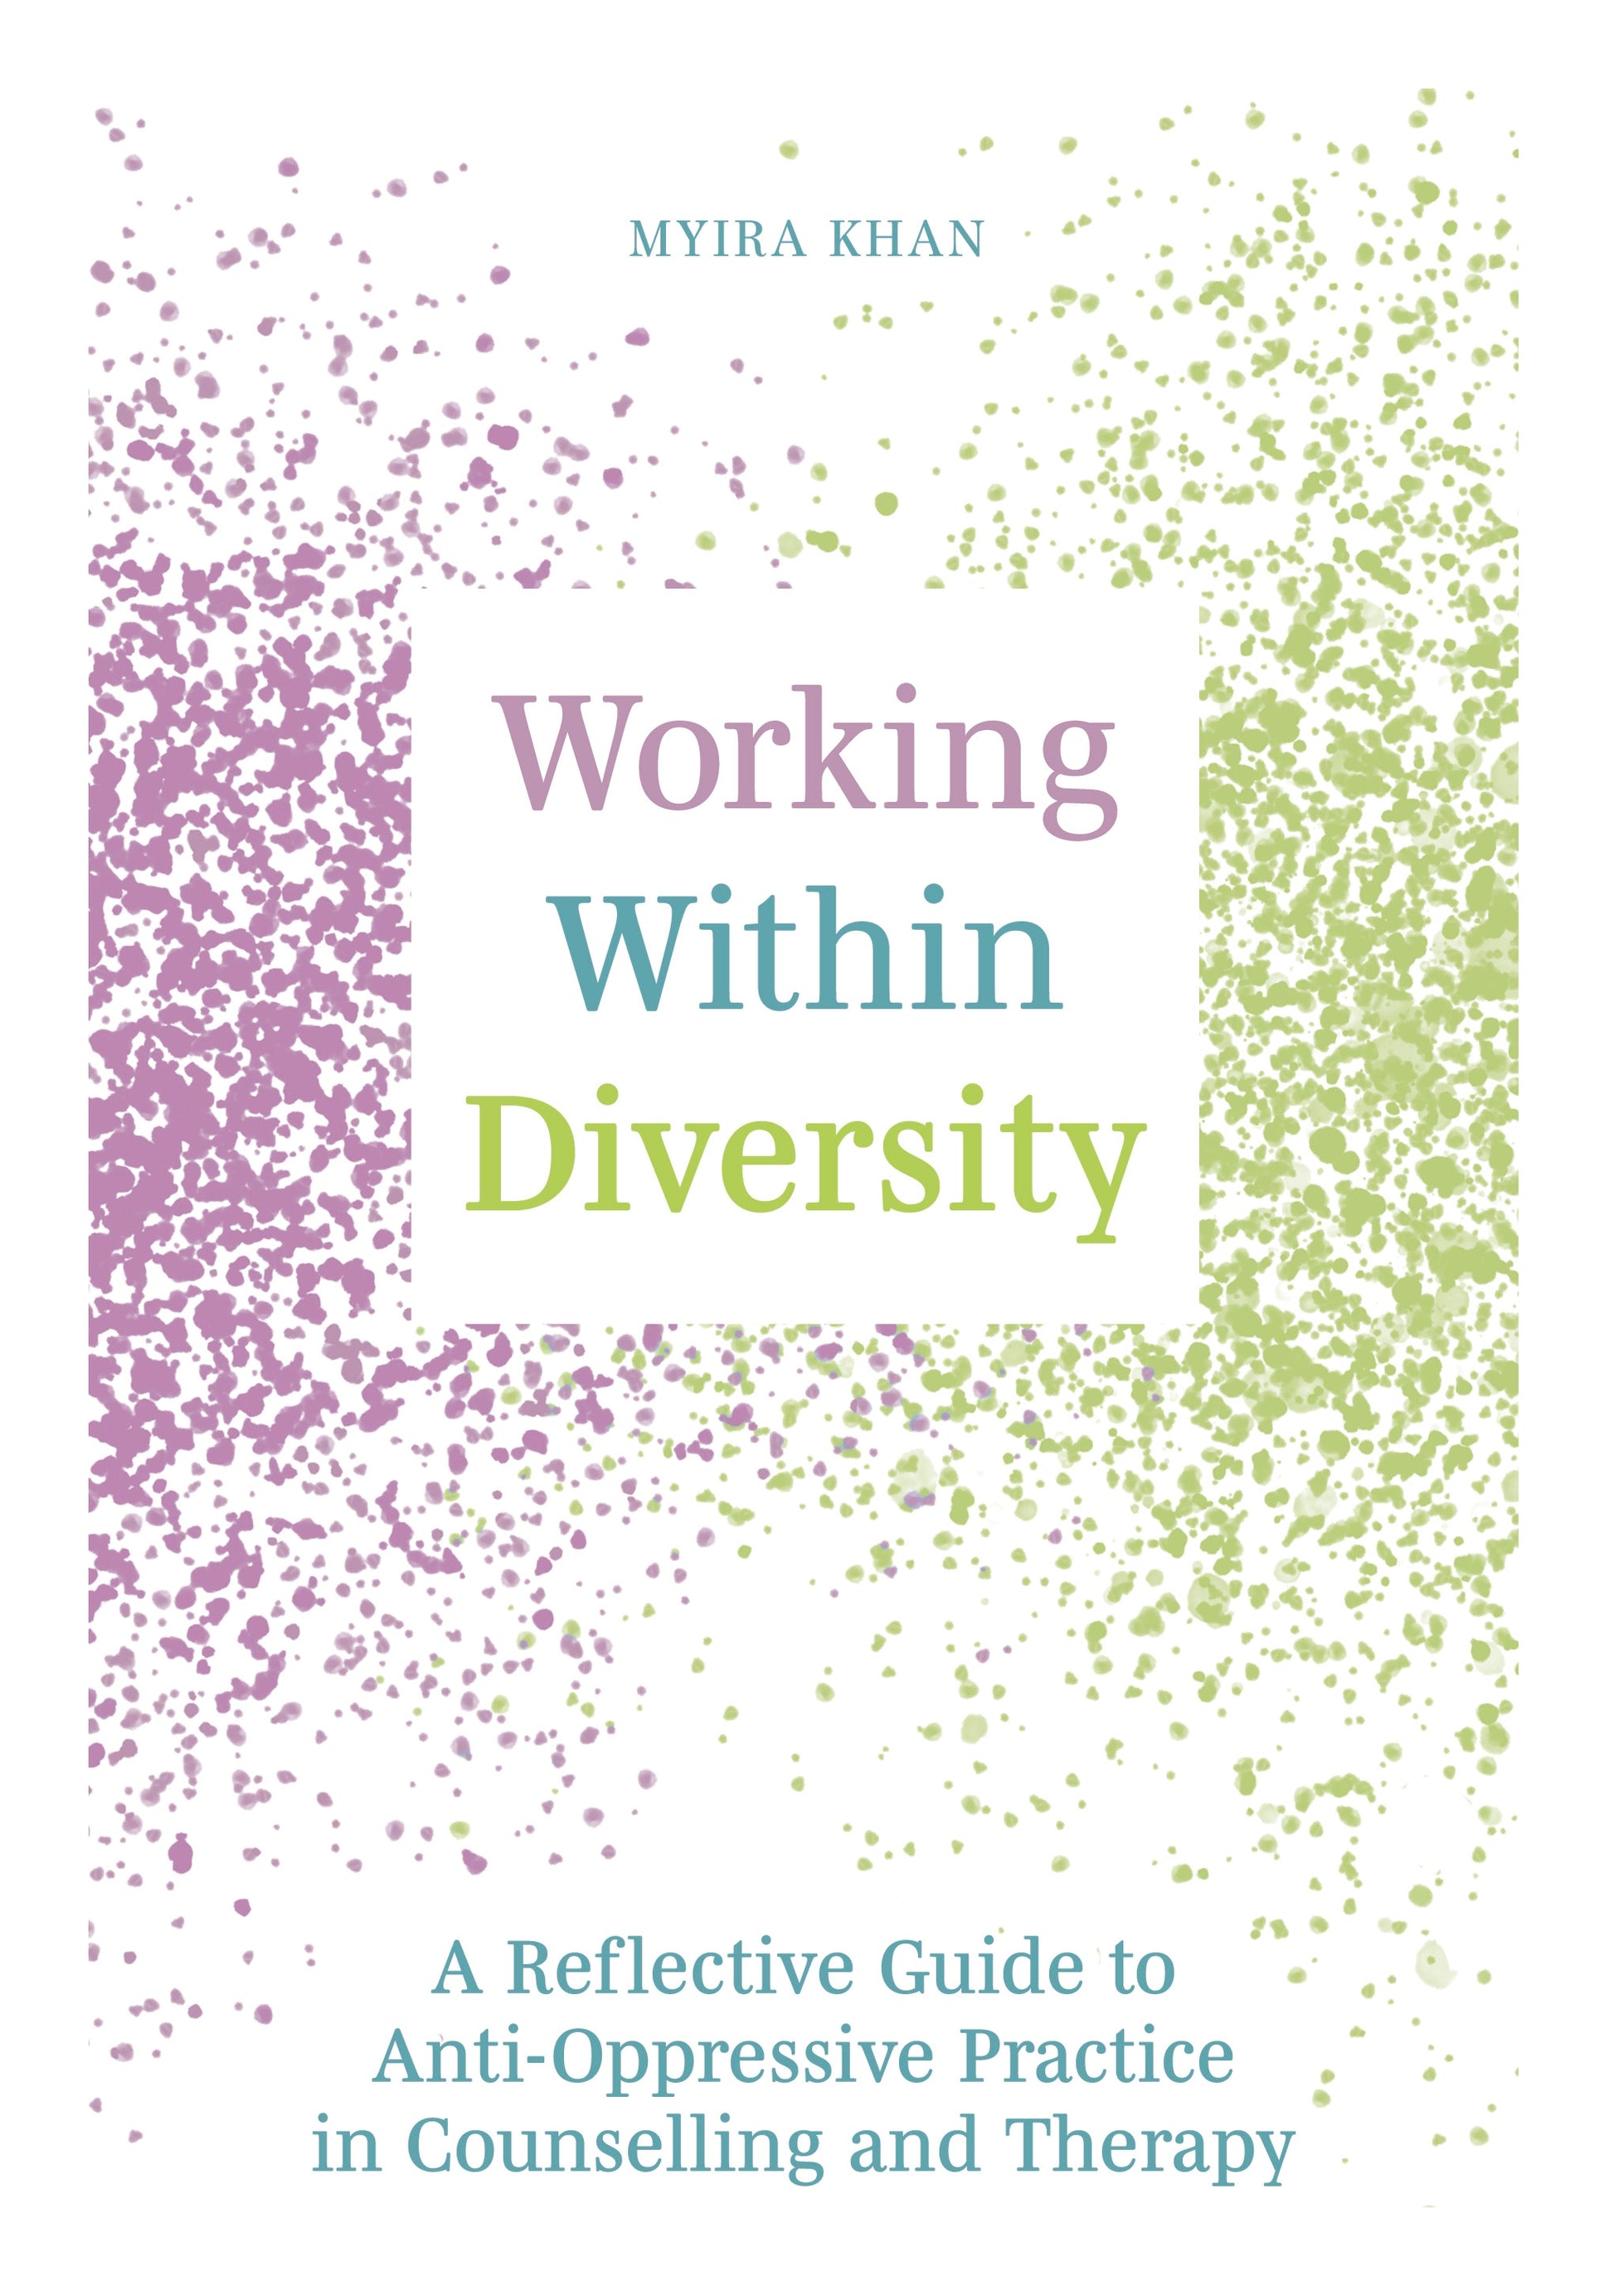 Working Within Diversity by Myira Khan